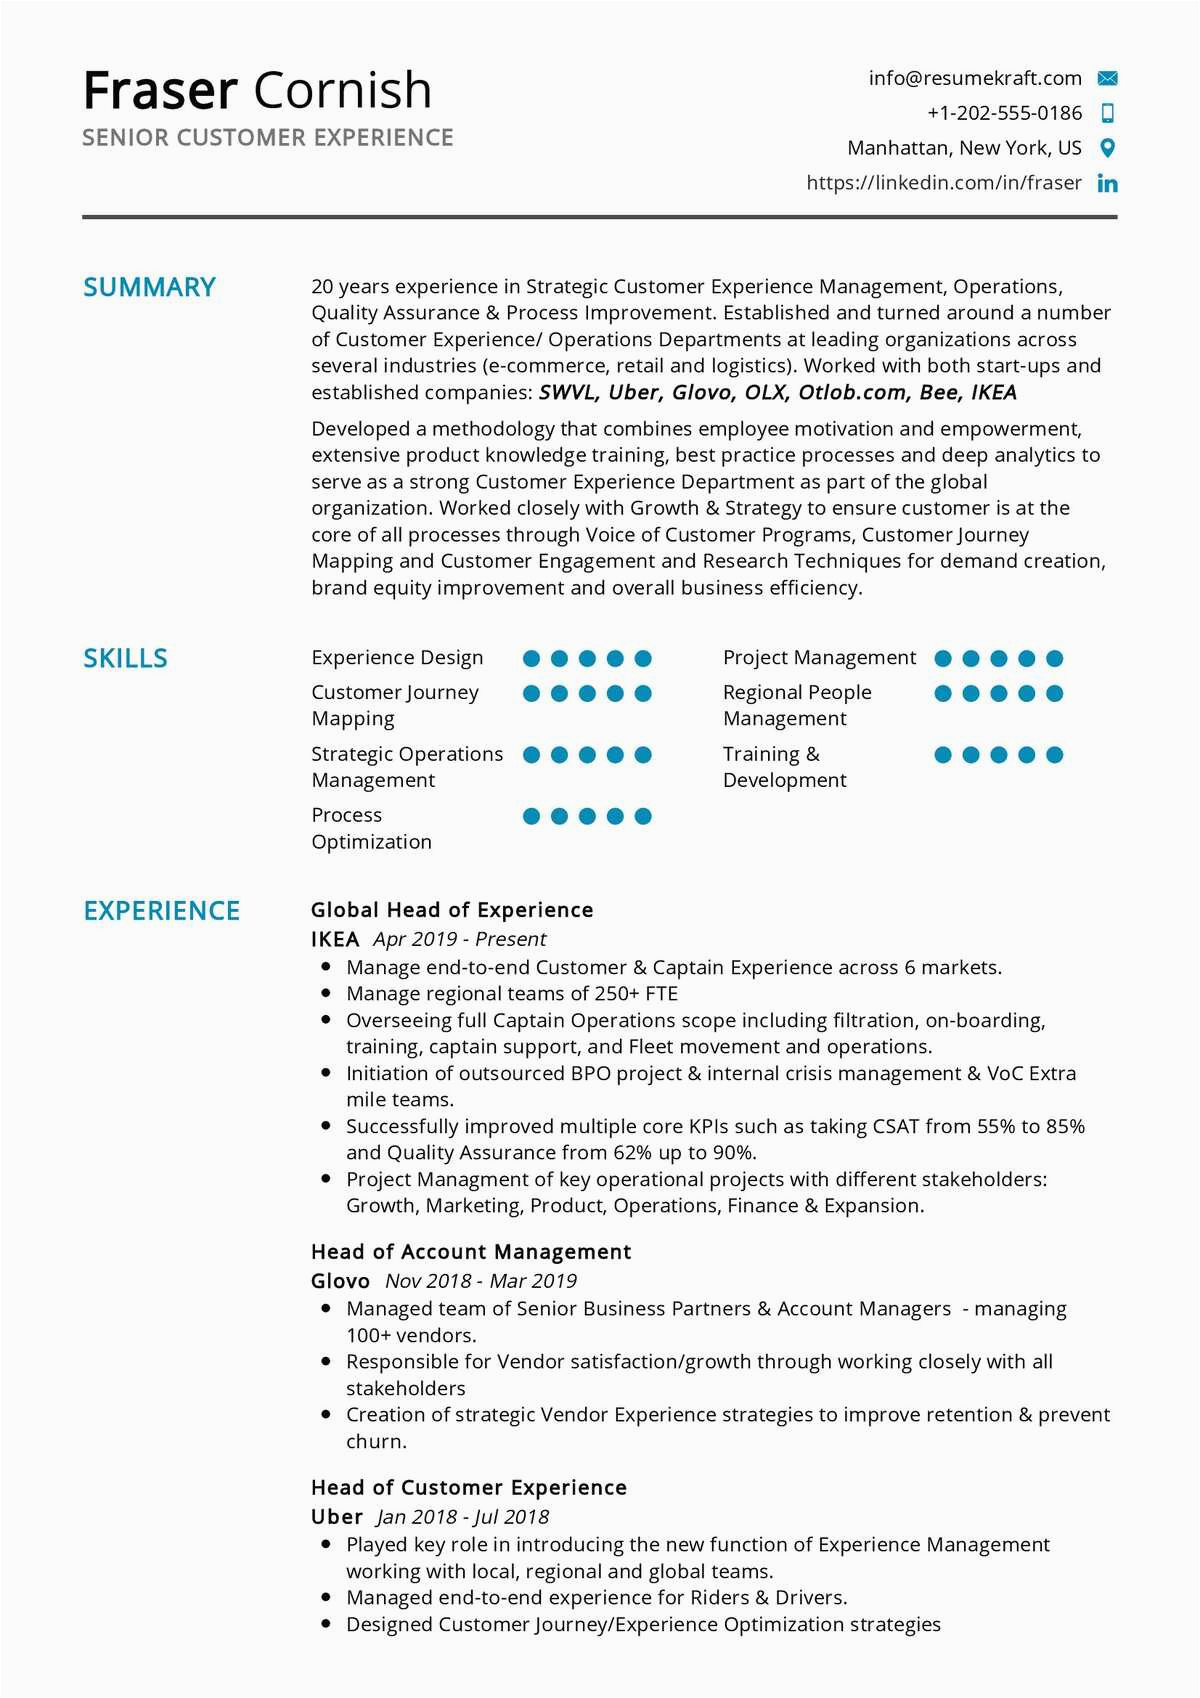 Sample Resume format with Work Experience Senior Customer Experience Resume Sample 2021